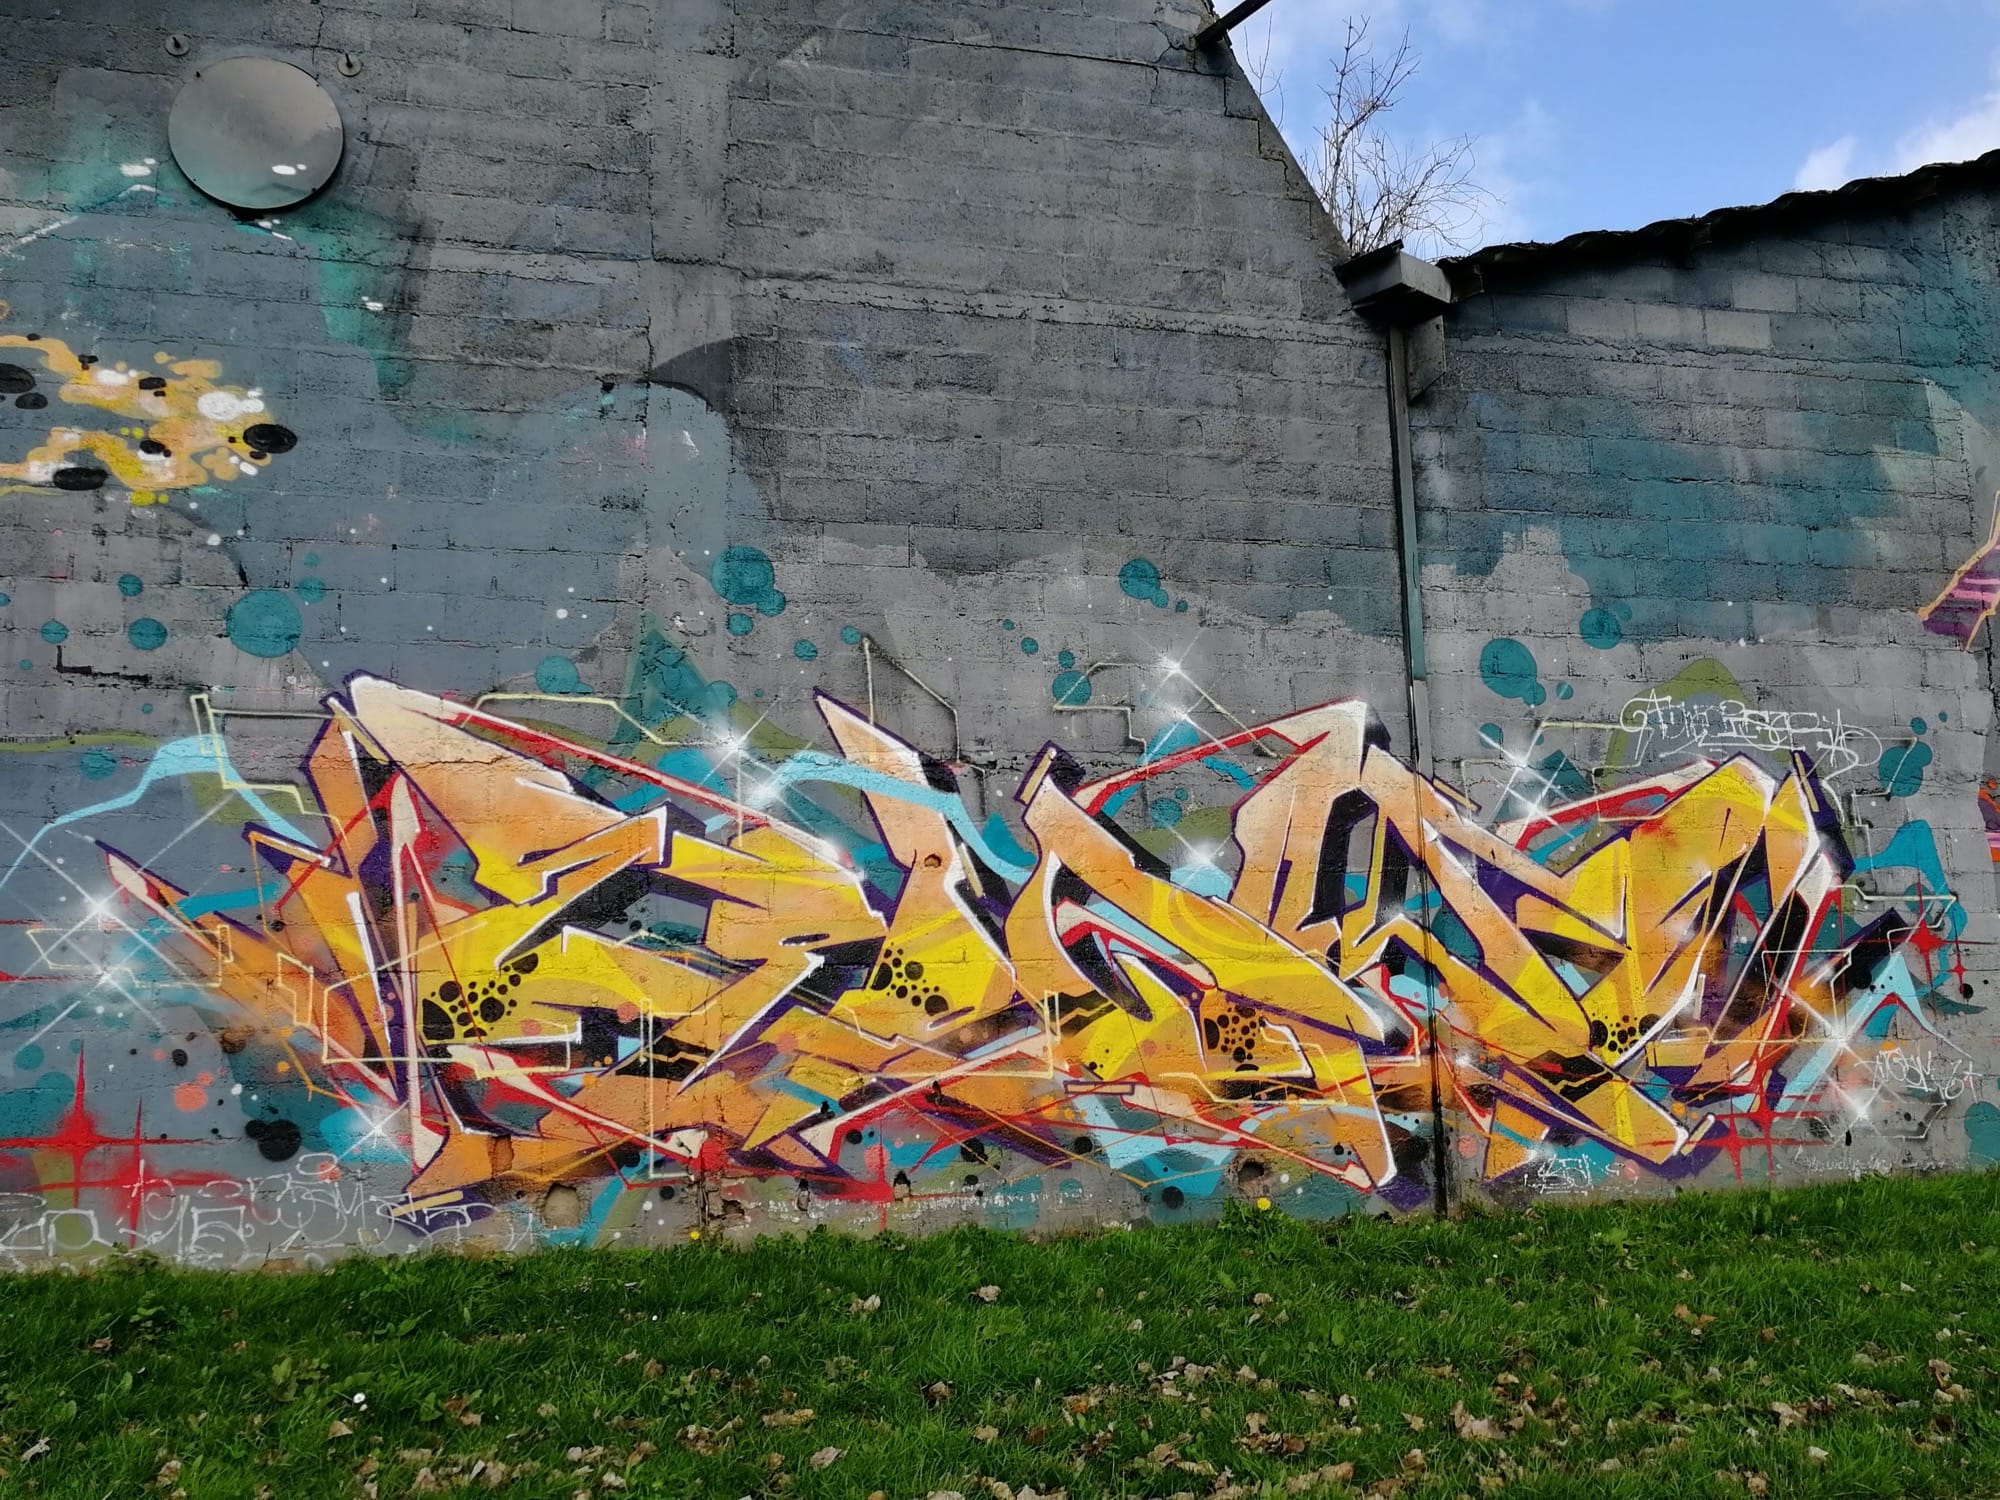 Graffiti 1213  captured by Rabot in Redon France